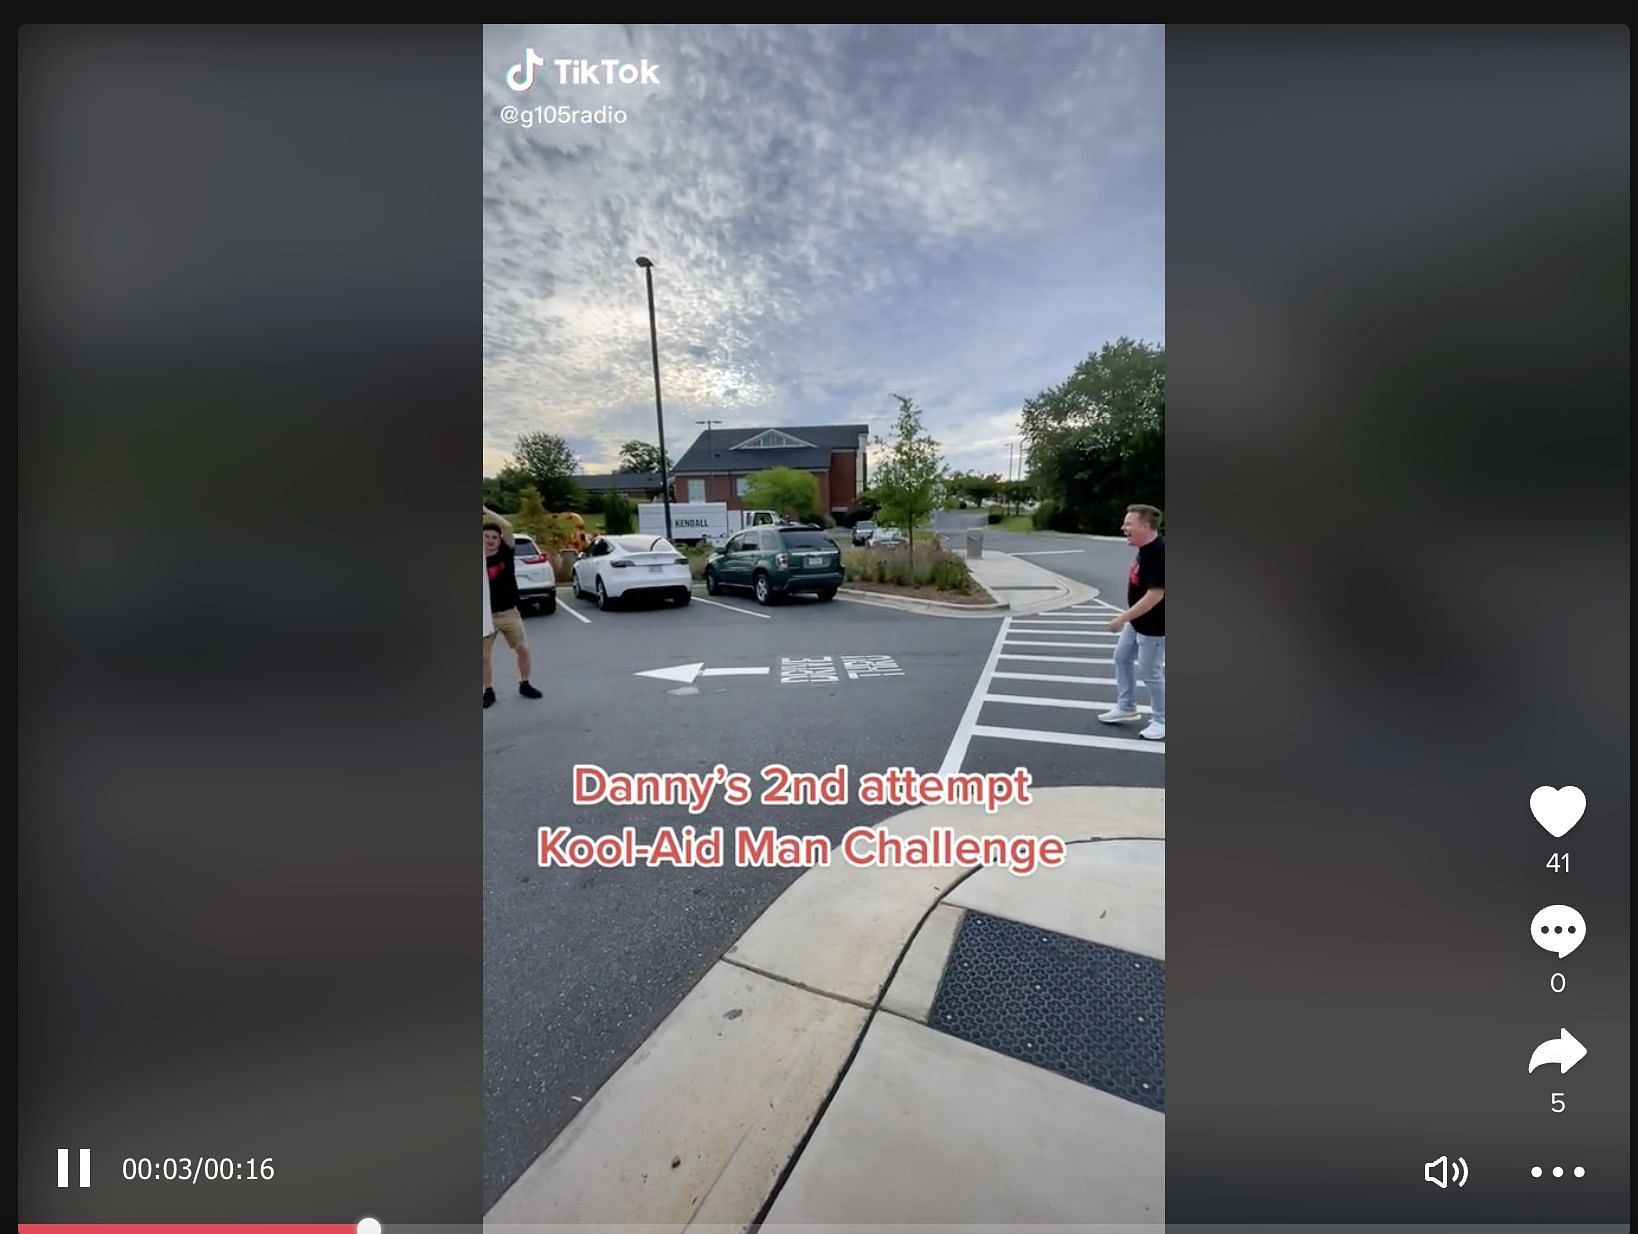 Police issue warnings as social media users damage fences and more in the neighborhood to participate in the Kool-Aid Man challenge. (Image via TikTok)